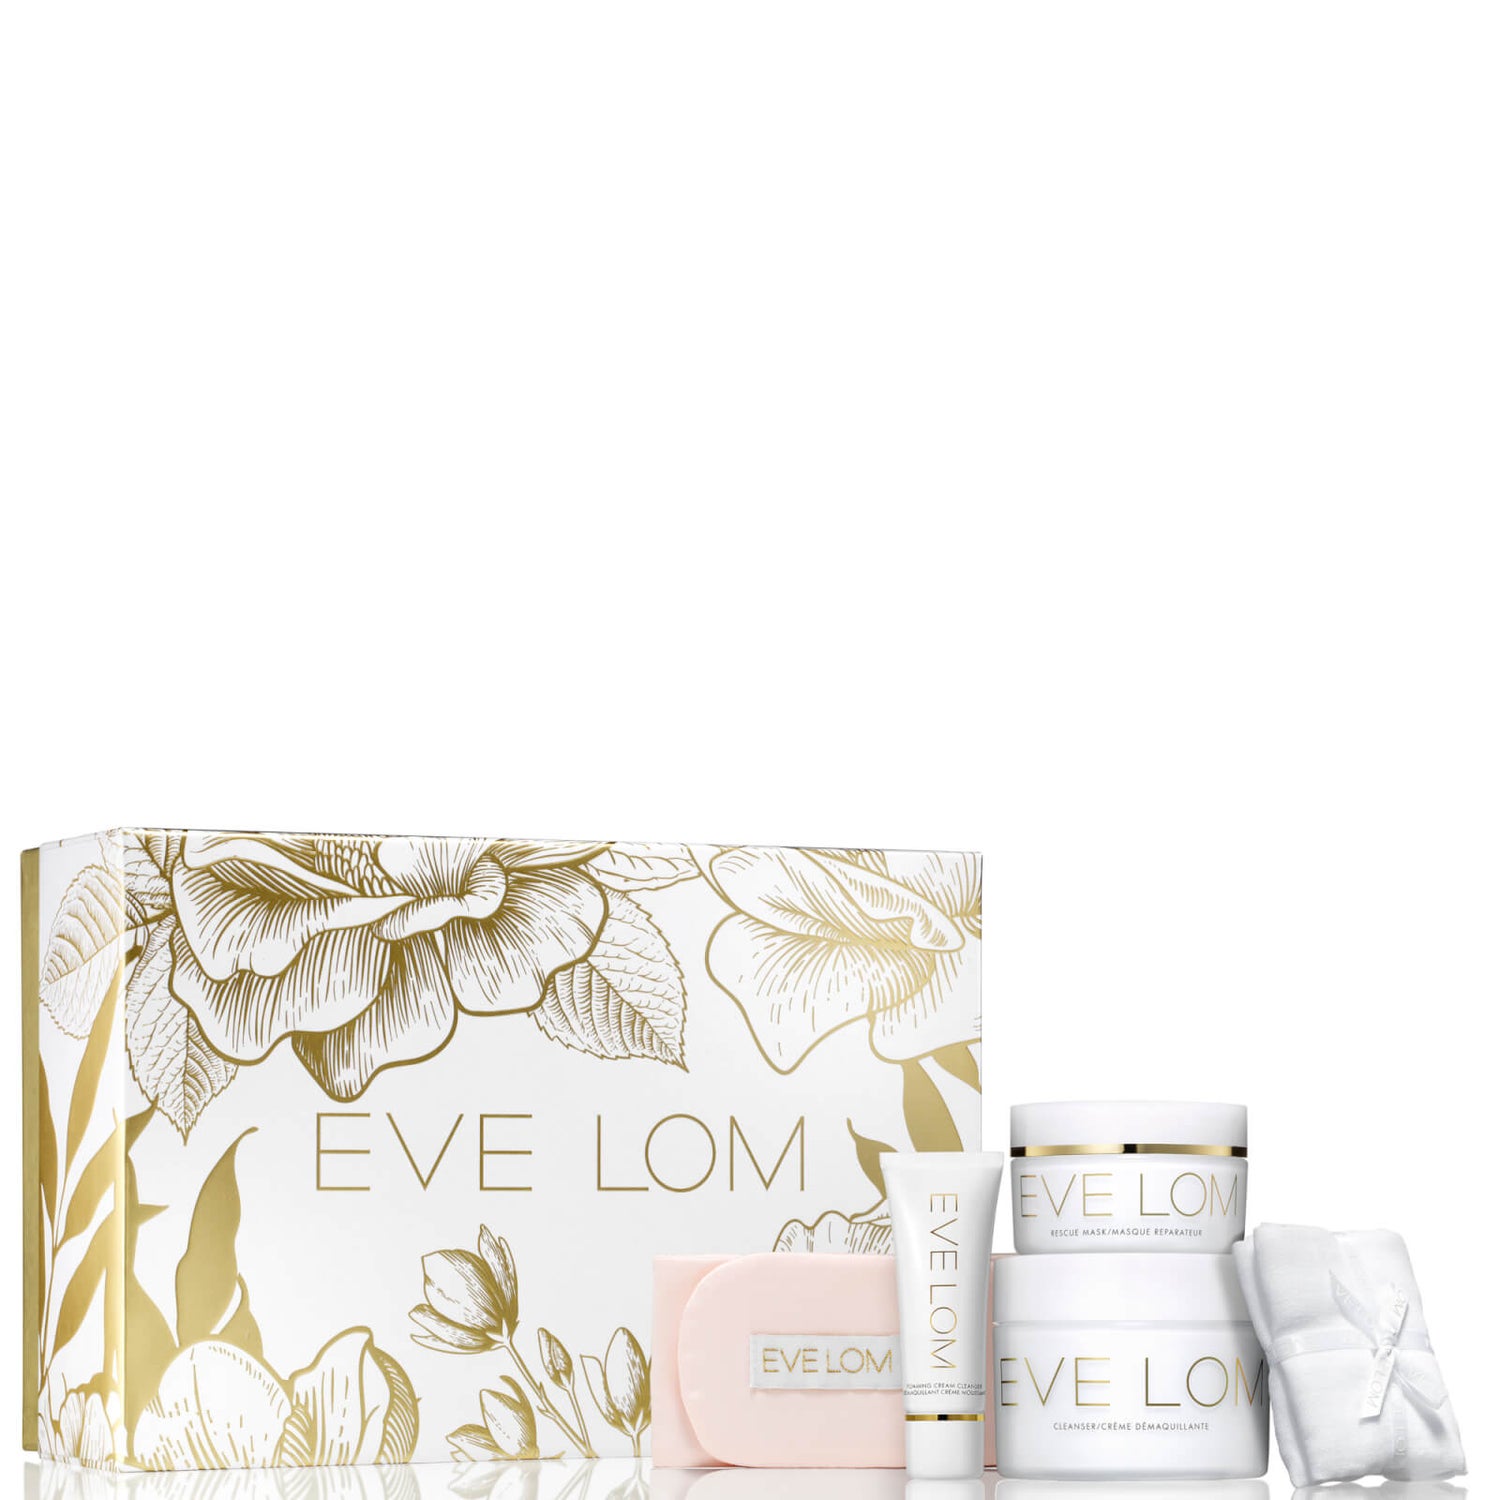 Eve Lom Decadent Double Cleanse Ritual Set Holiday 2022 (Worth £163.82) - Exclusive to LOOKFANTASTIC